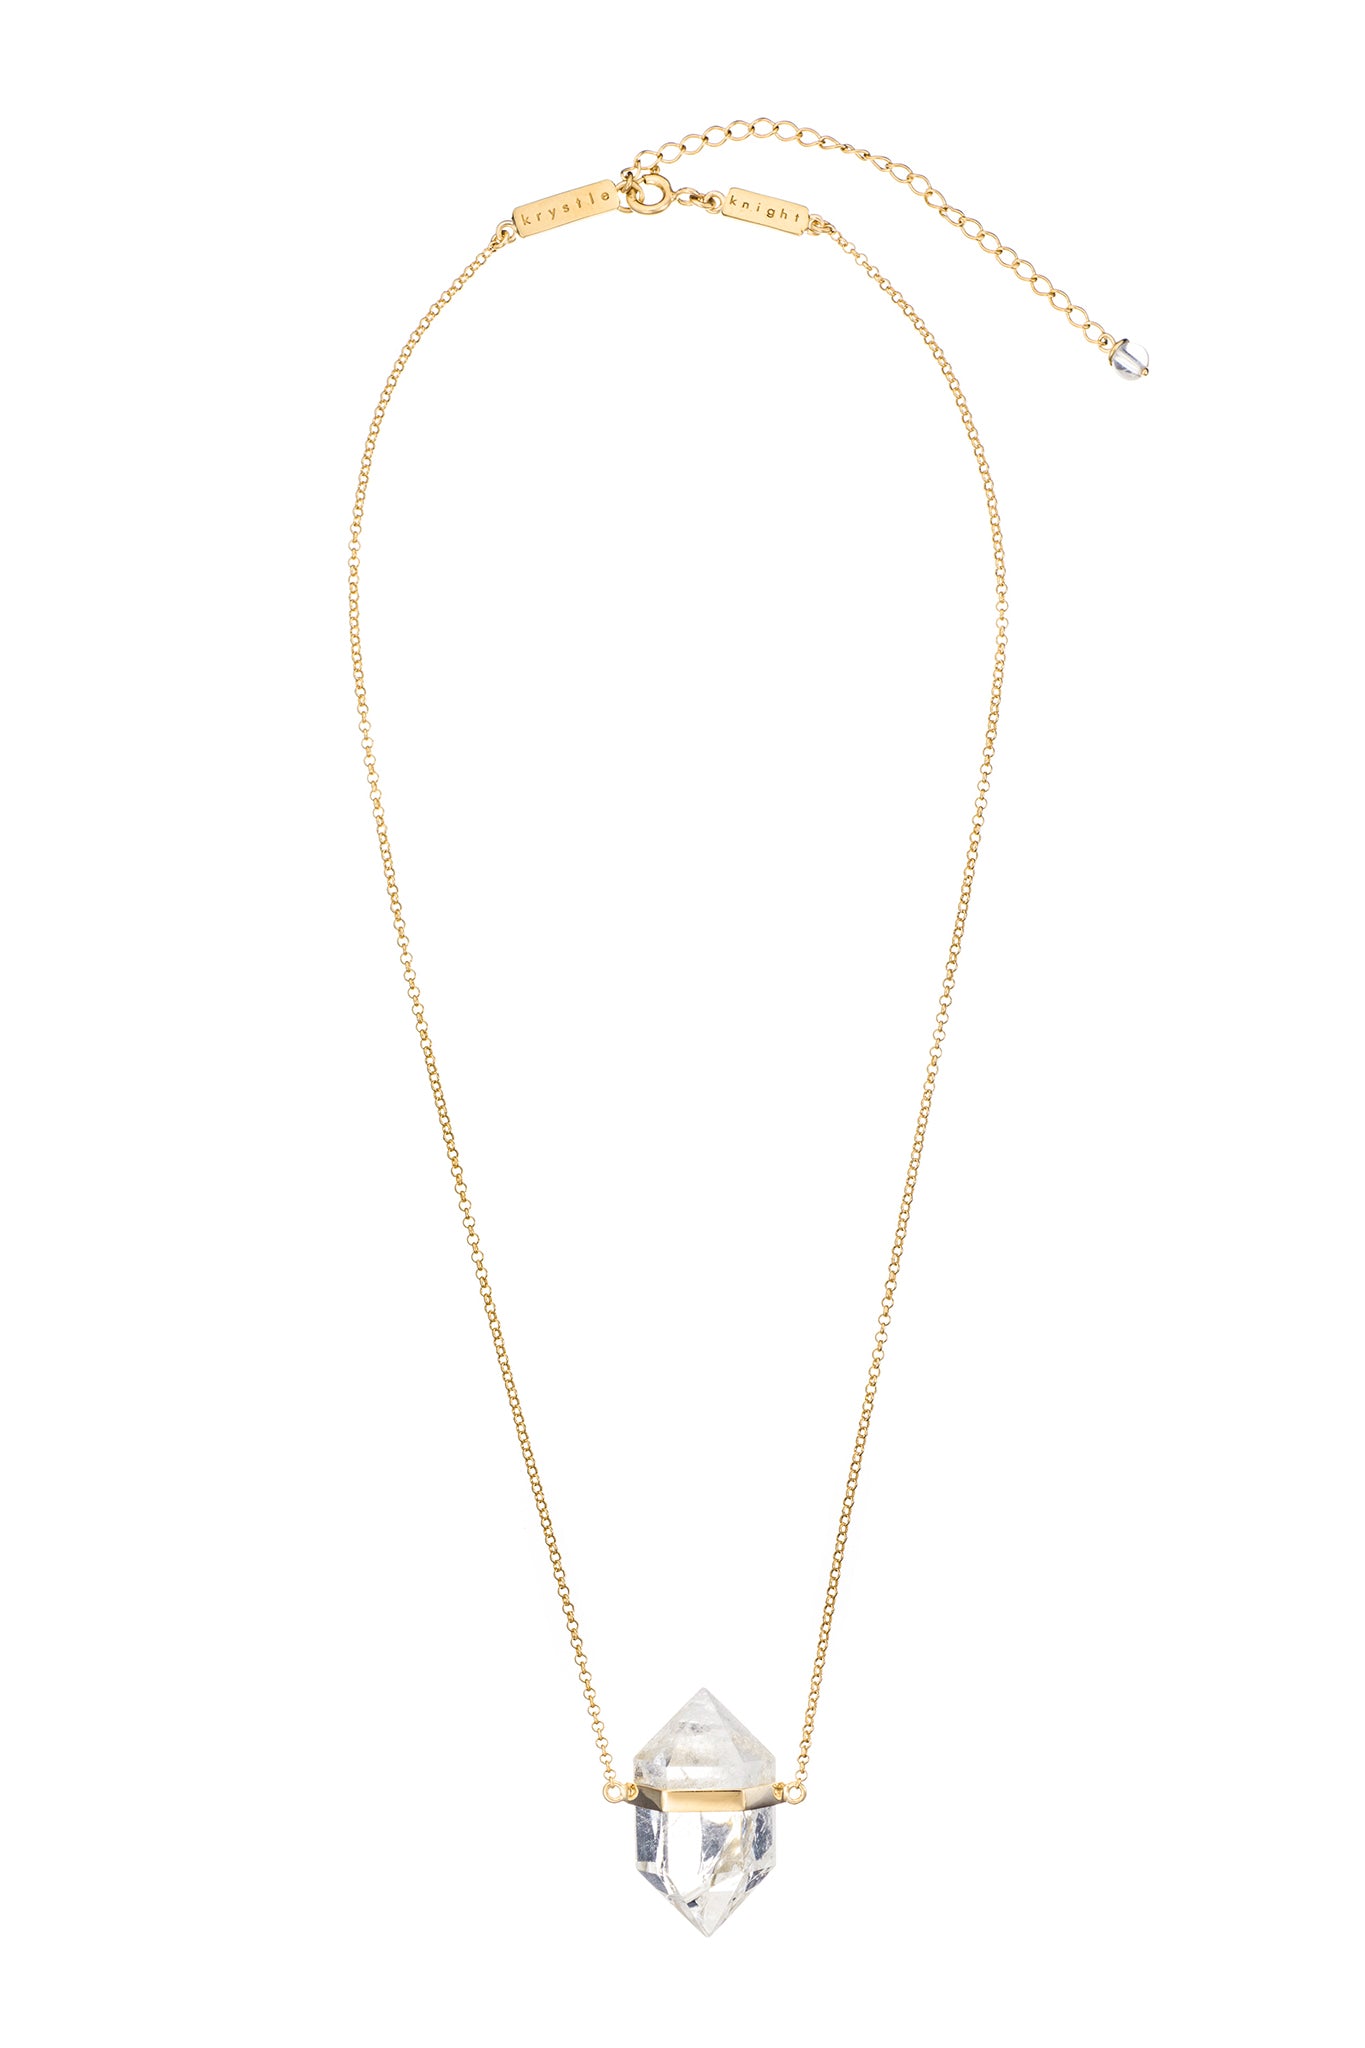 Krystle-Knight-Keep-Me-Calm-Gold-Necklace